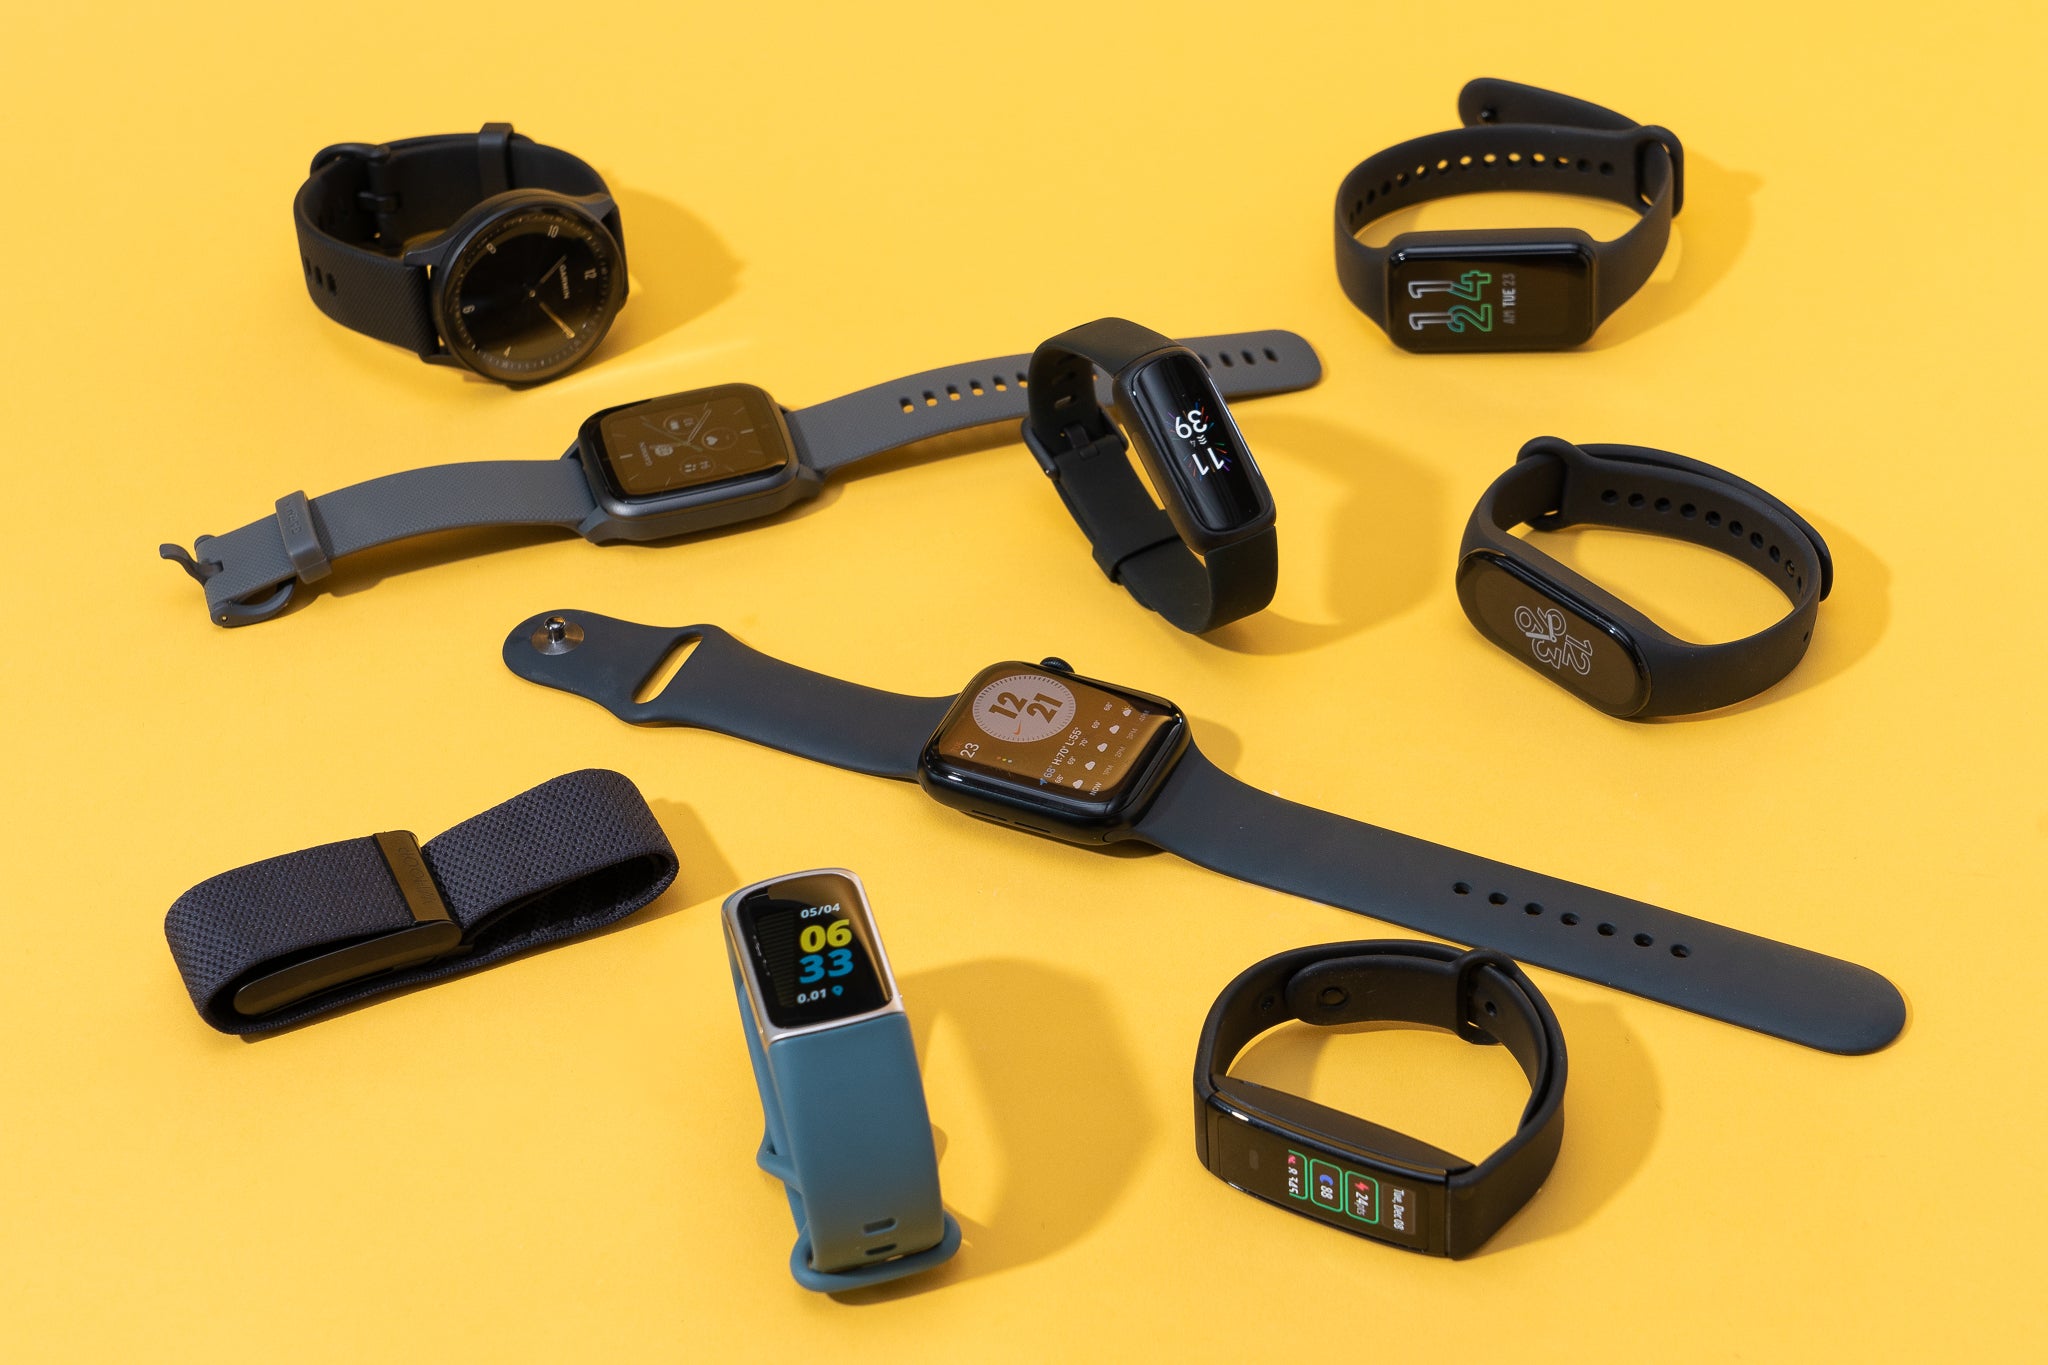 Fitness Band Review: The Best Wearable for Tracking Your Health